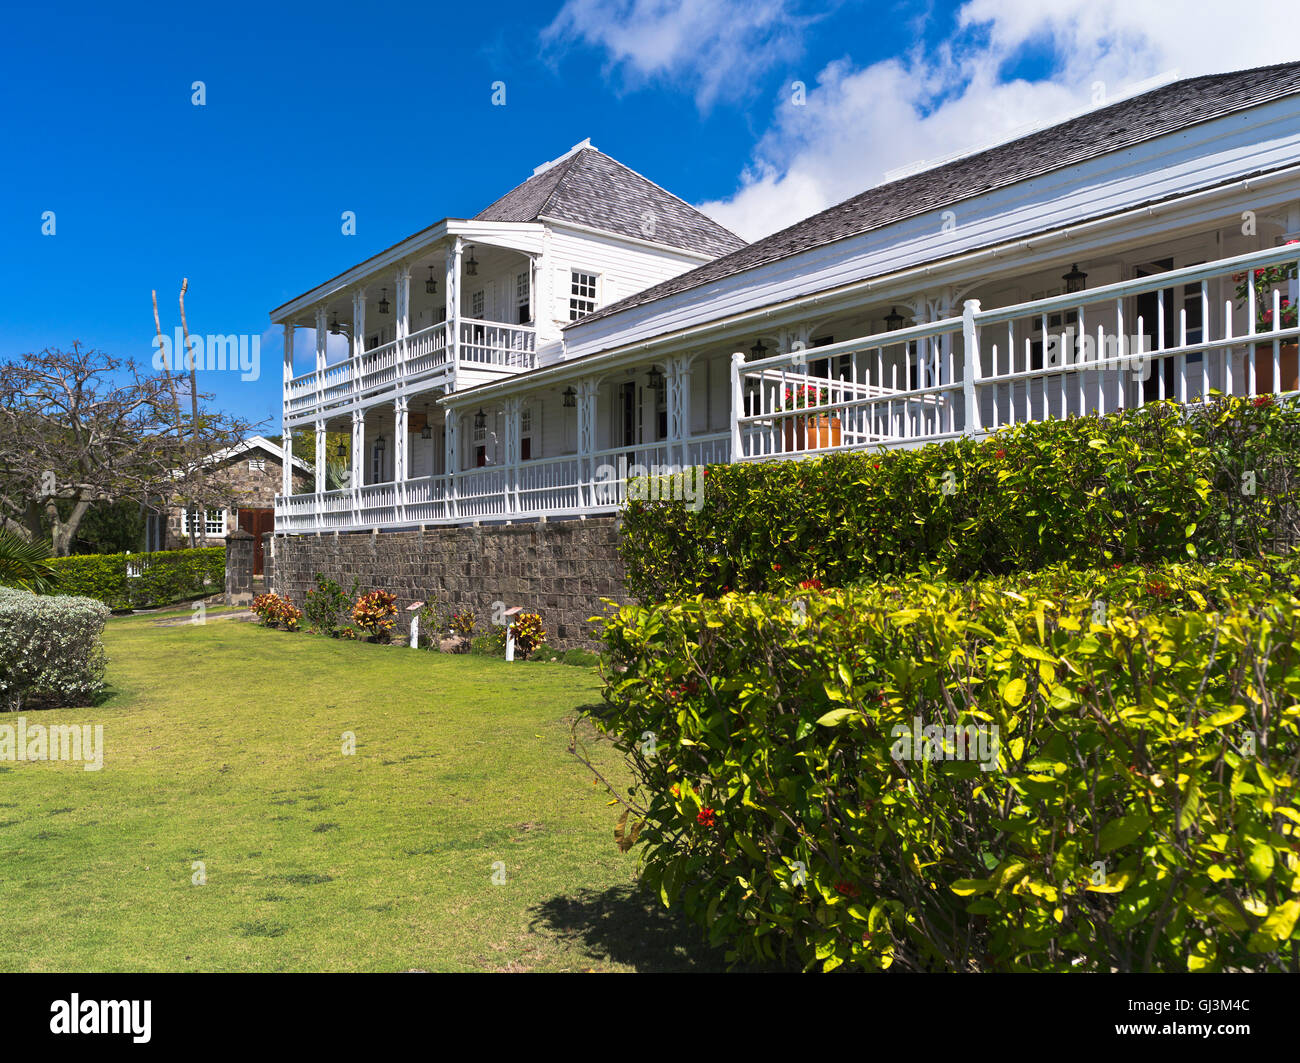 dh Fairview Great House St KITTS CARIBBEAN Antigua casa colonial museo Jardín Nelsons jardines exteriores nadie casa Foto de stock